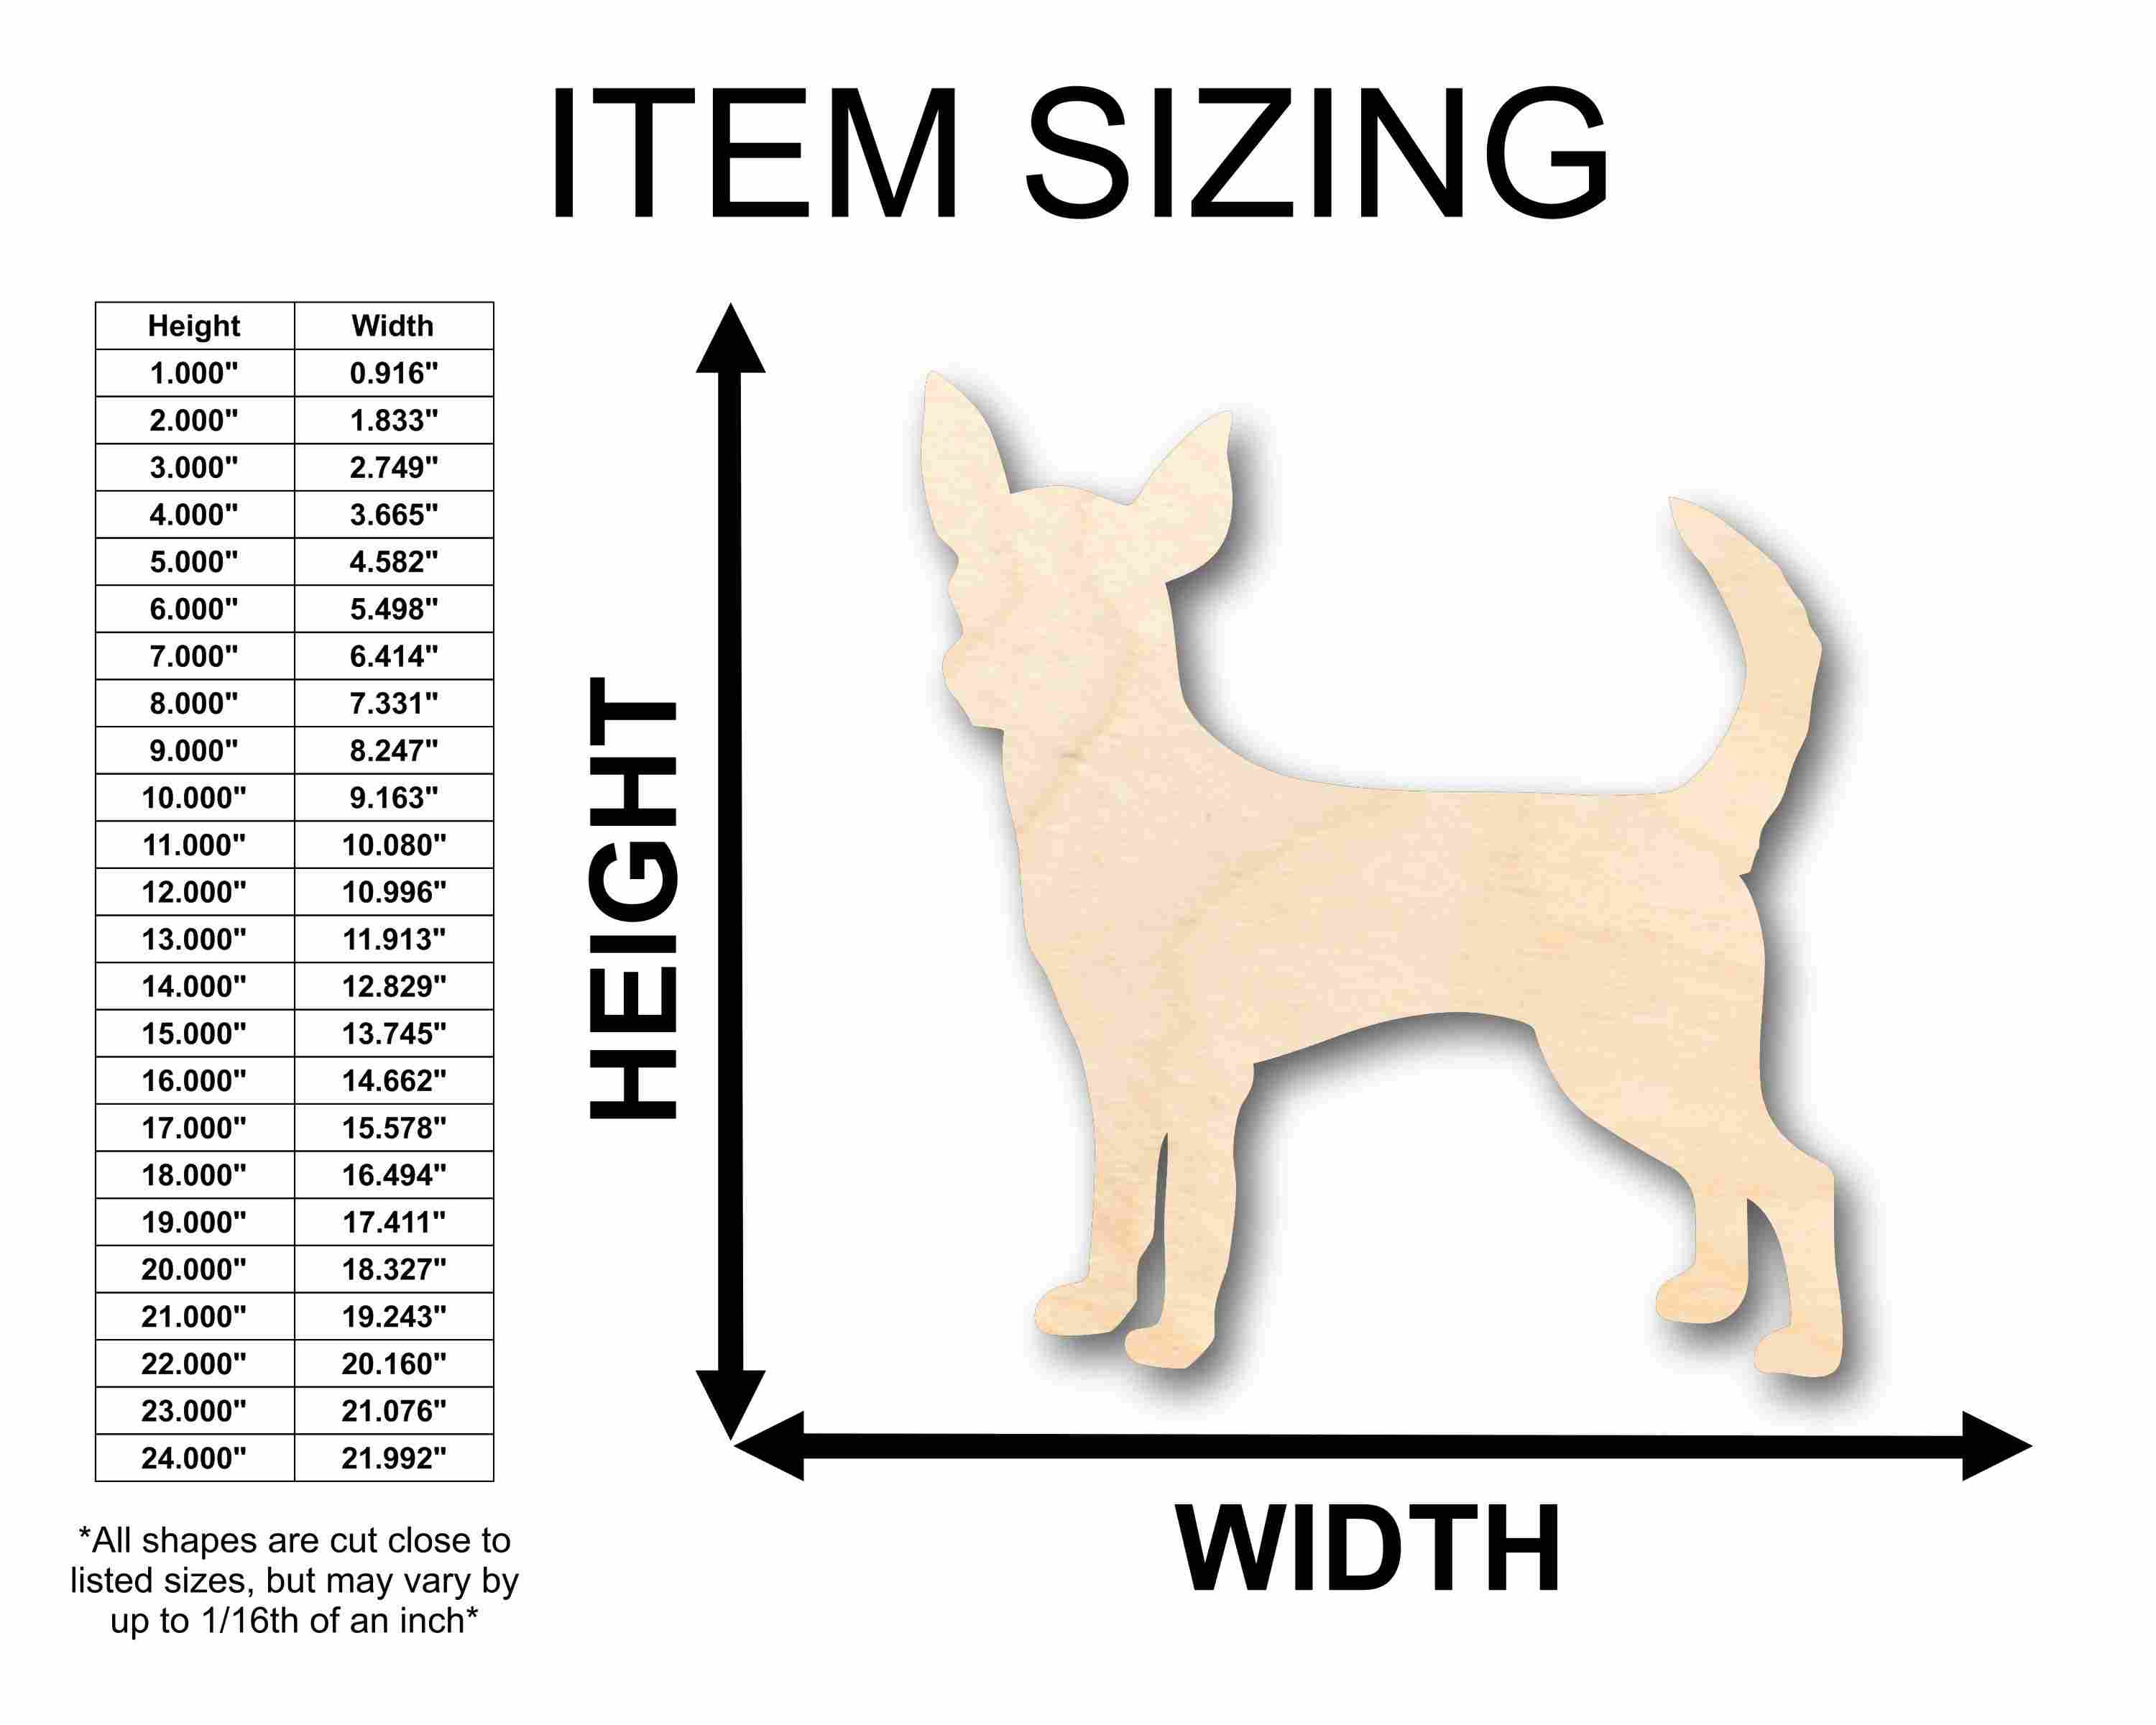 Unfinished Wood Chihuahua Silhouette - Craft- up to 24